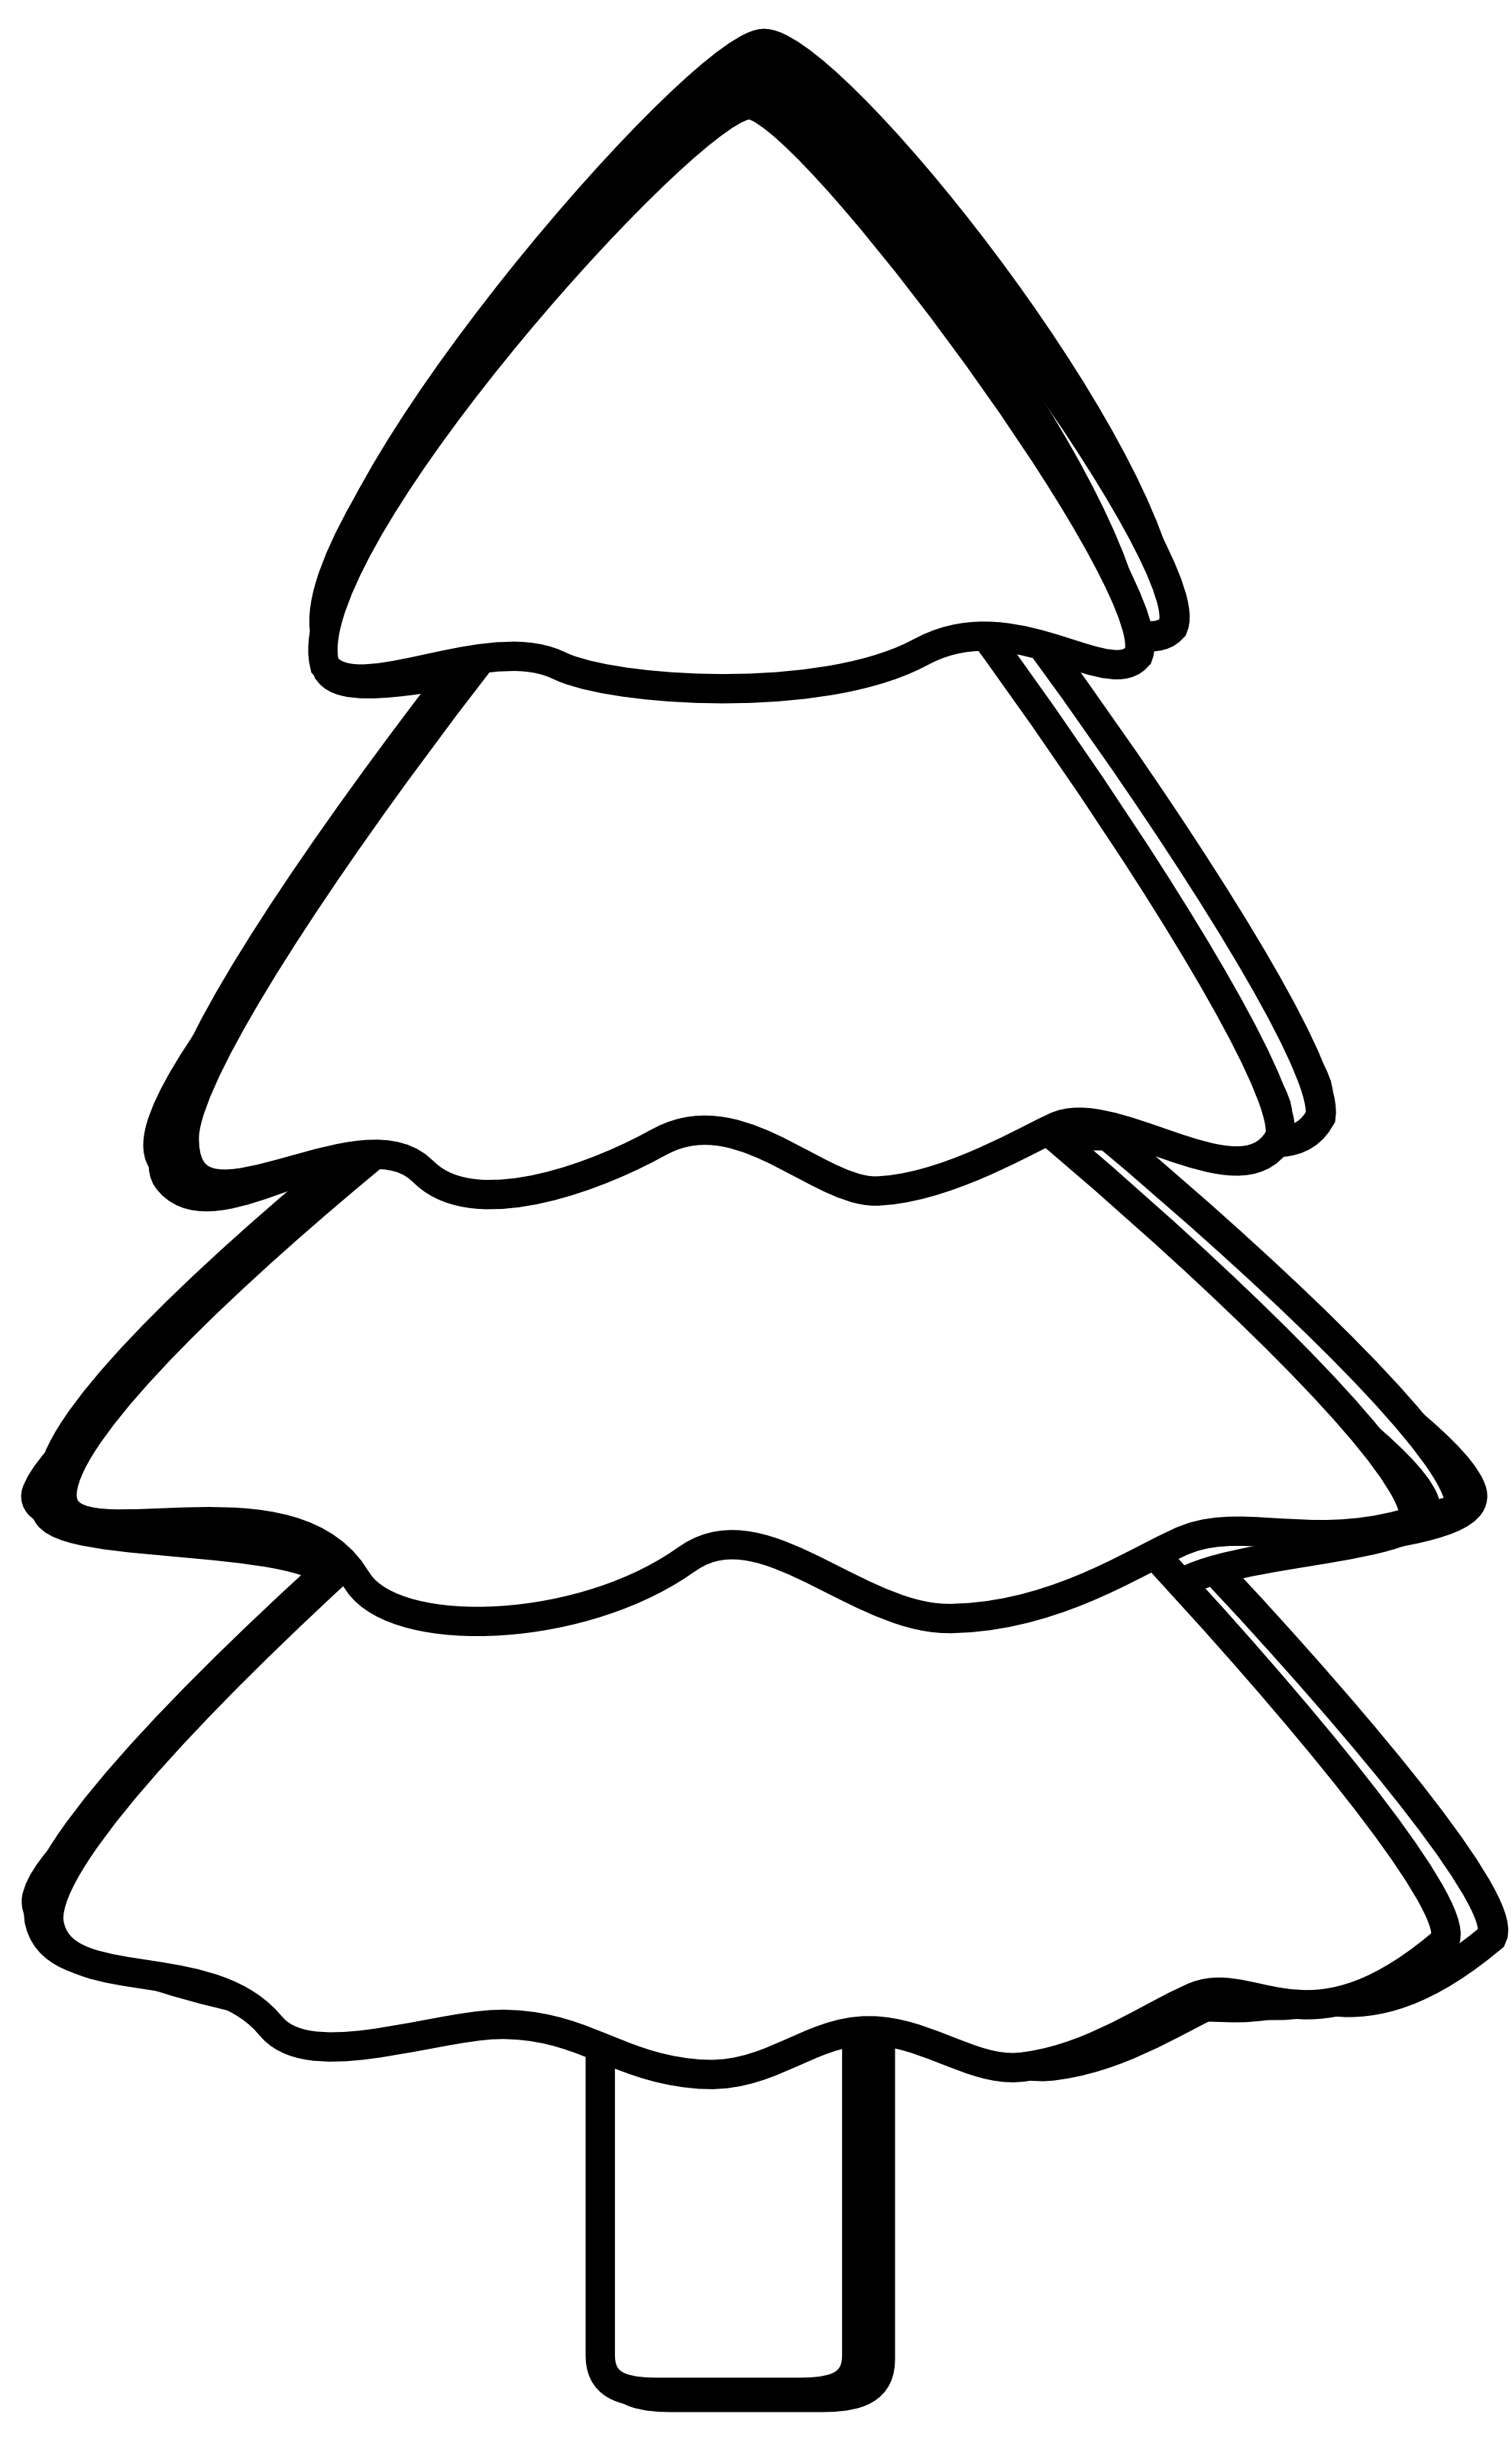 Pine Tree Black And White Hd Photos Clipart